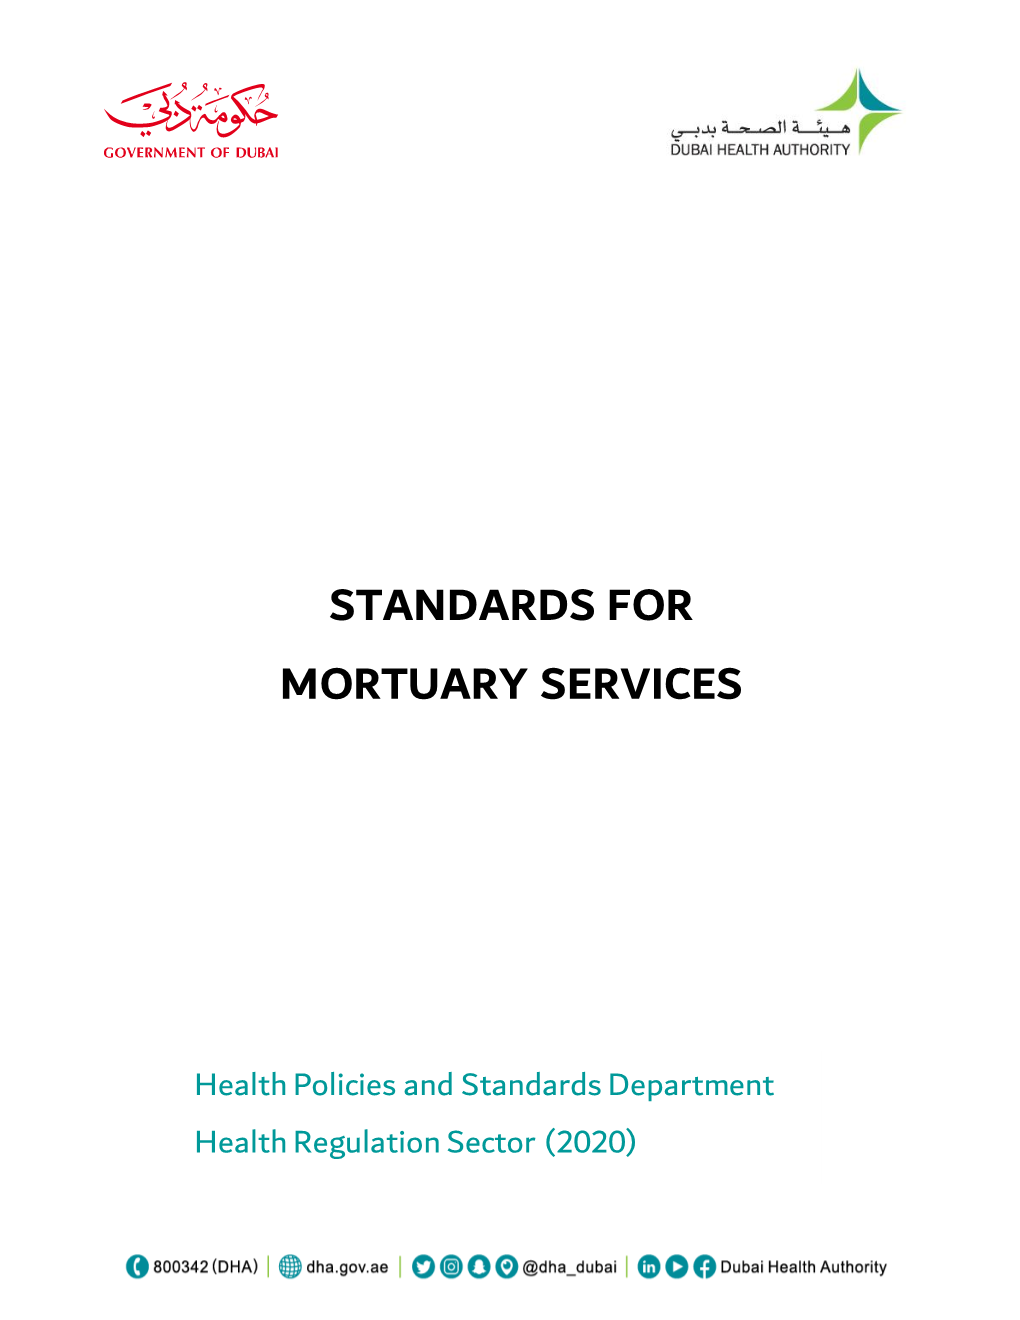 Standards for Mortuary Services